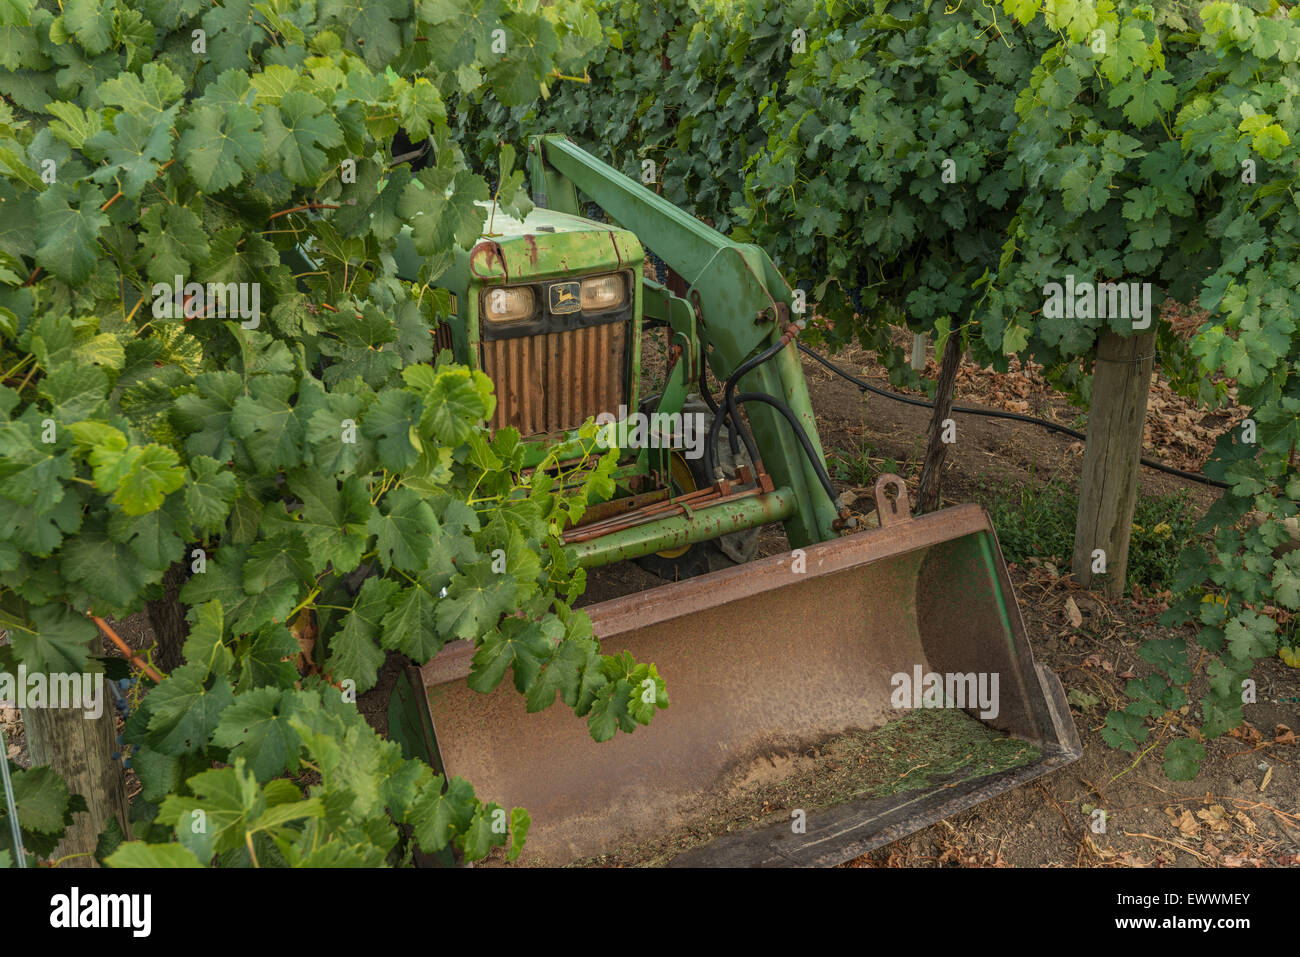 Front loading old green tractor in vineyard Stock Photo